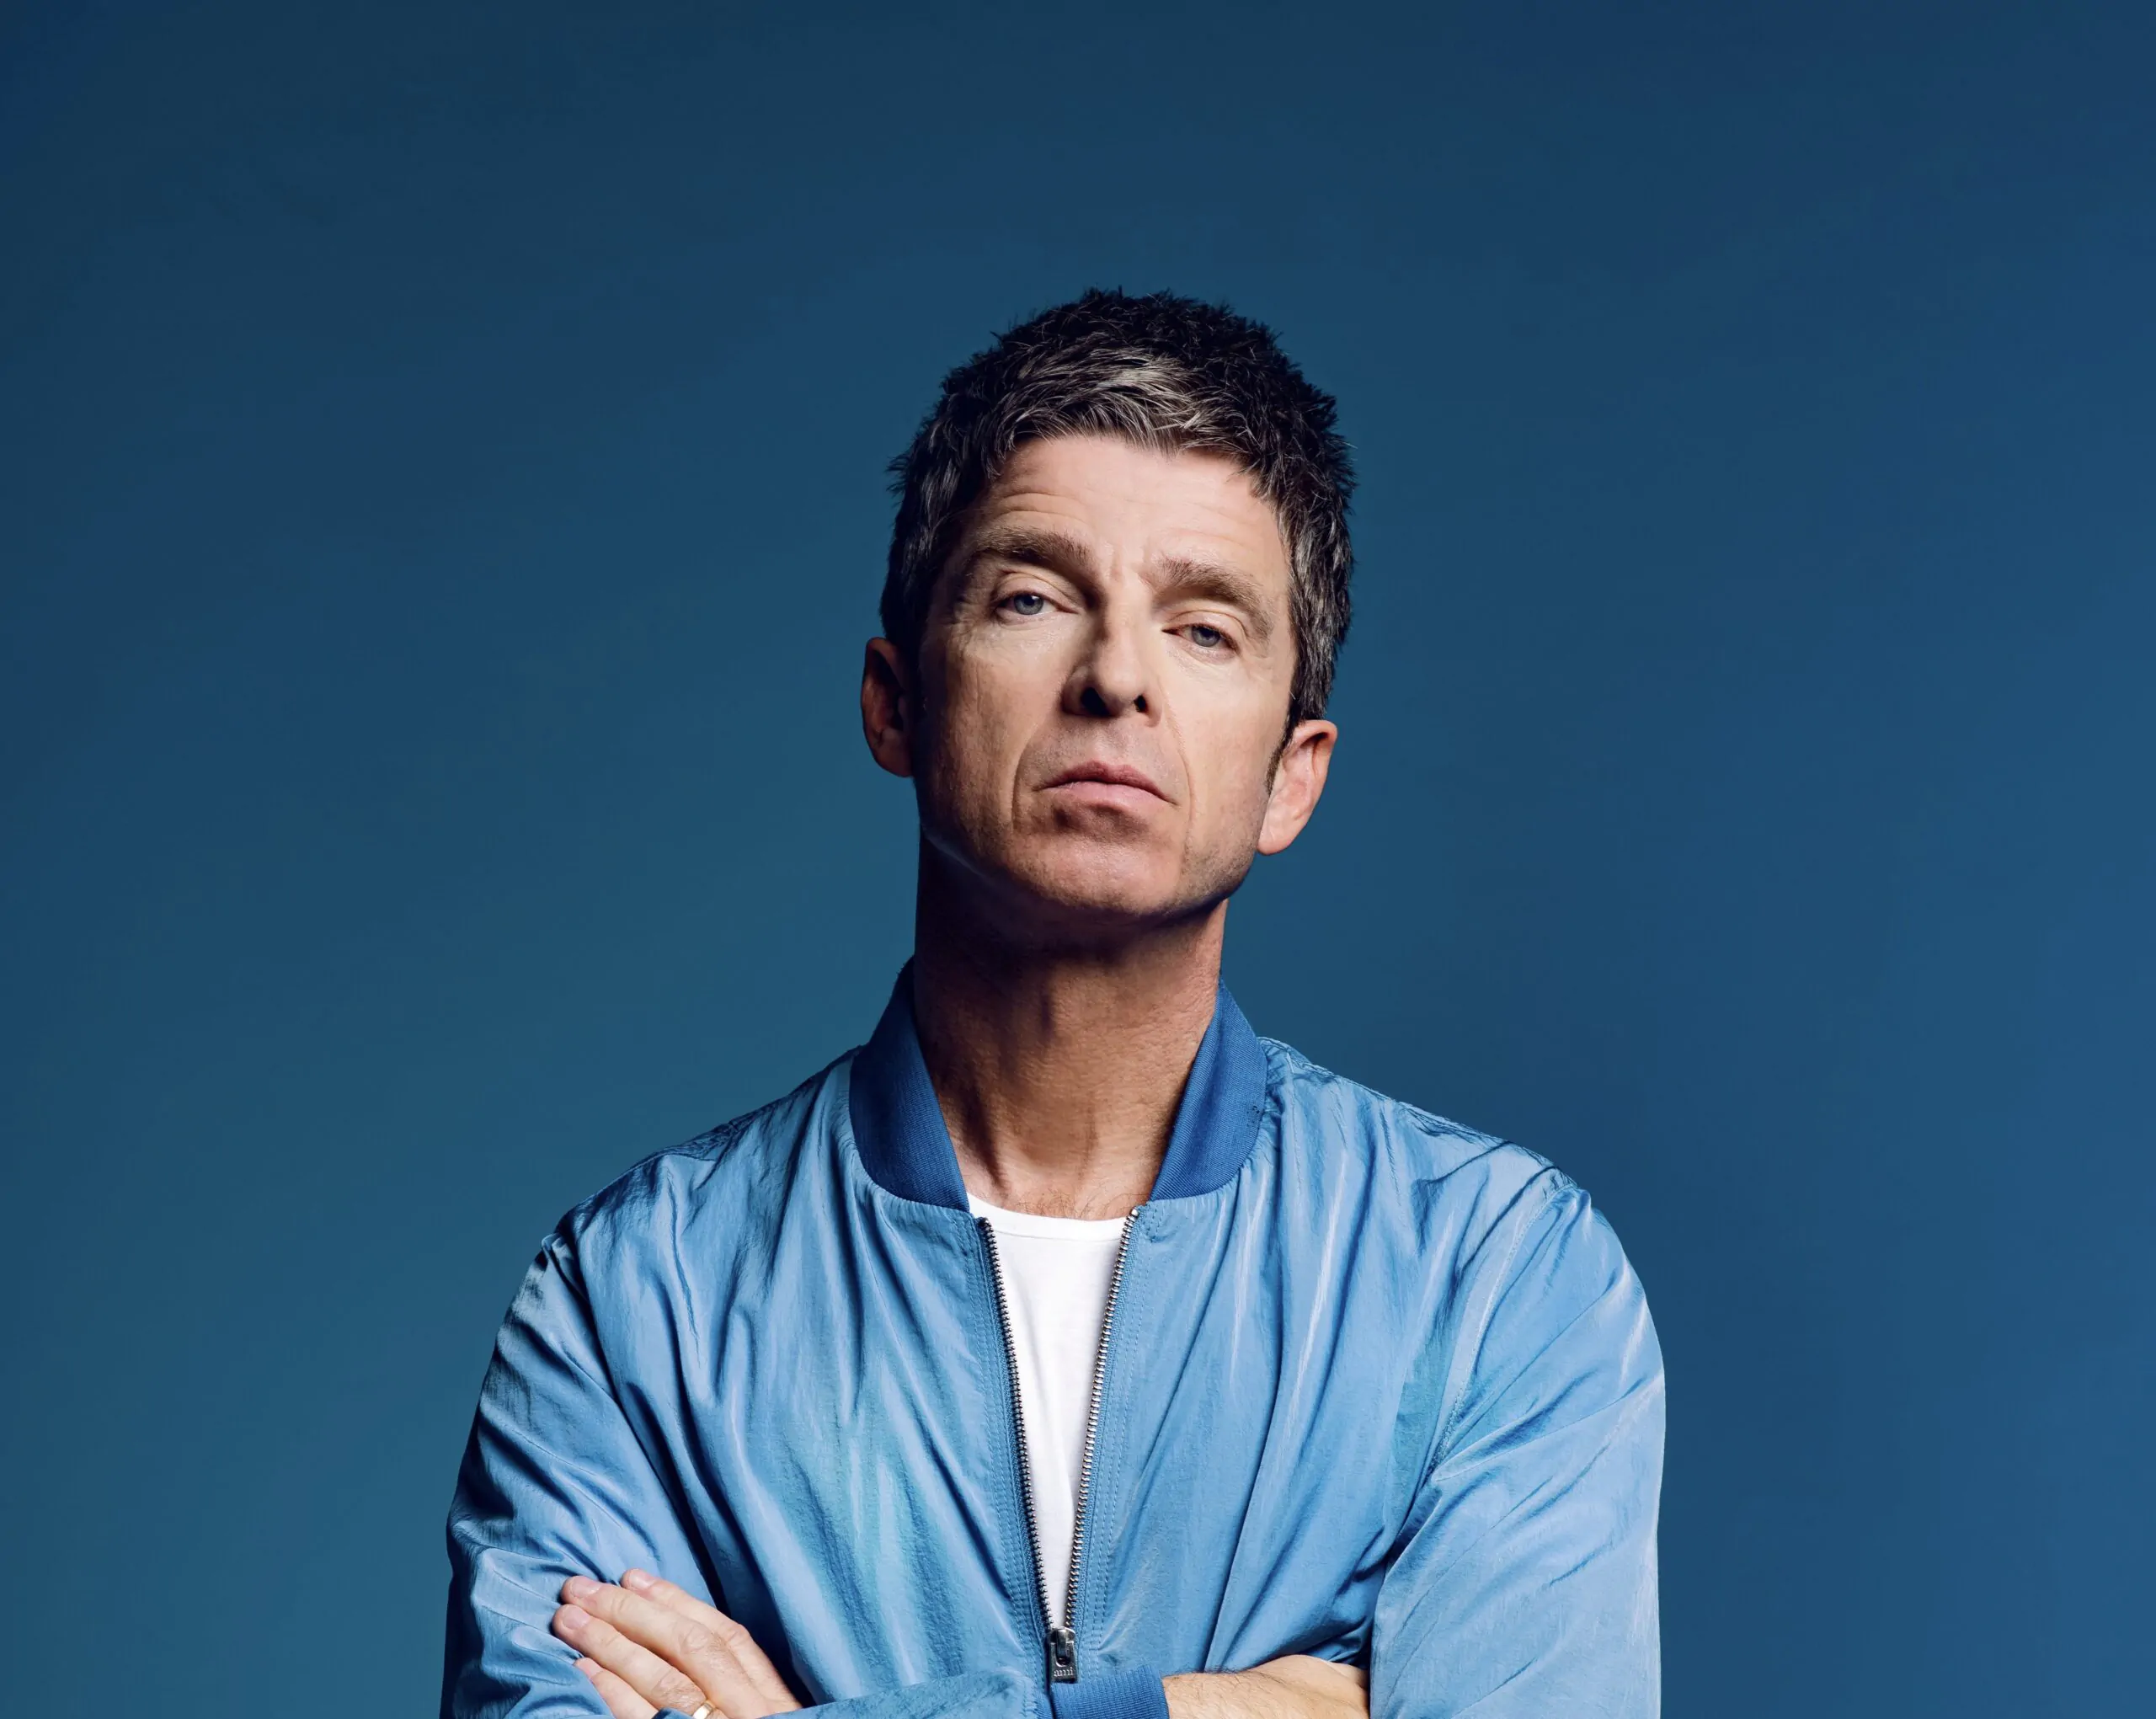 NOEL GALLAGHER’S HIGH FLYING BIRDS release new single ‘Flying On The Ground’